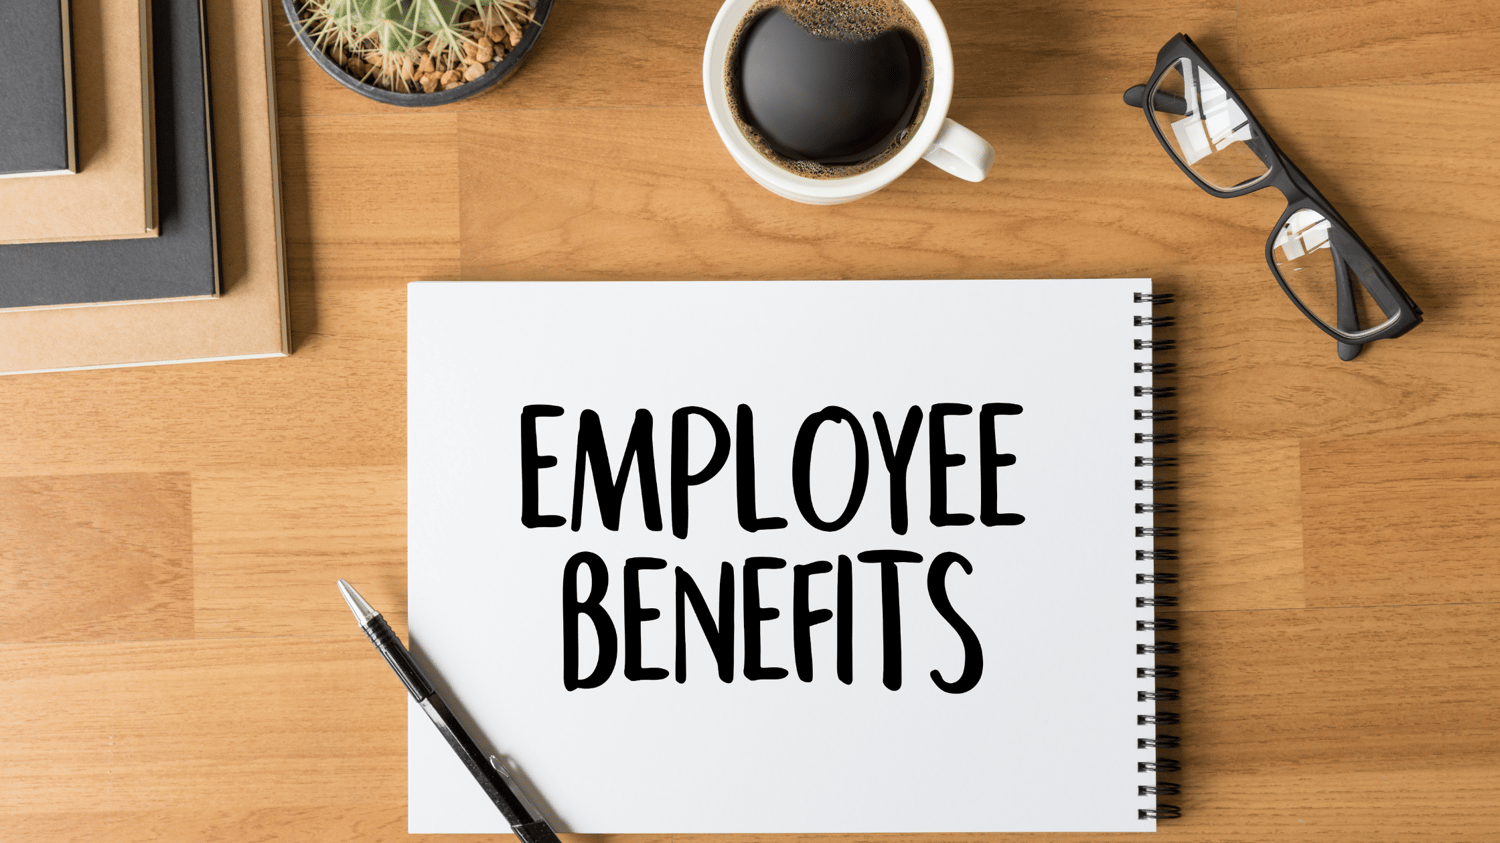 THE DOWNSIDE OF EMPLOYEE GROUP BENEFITS